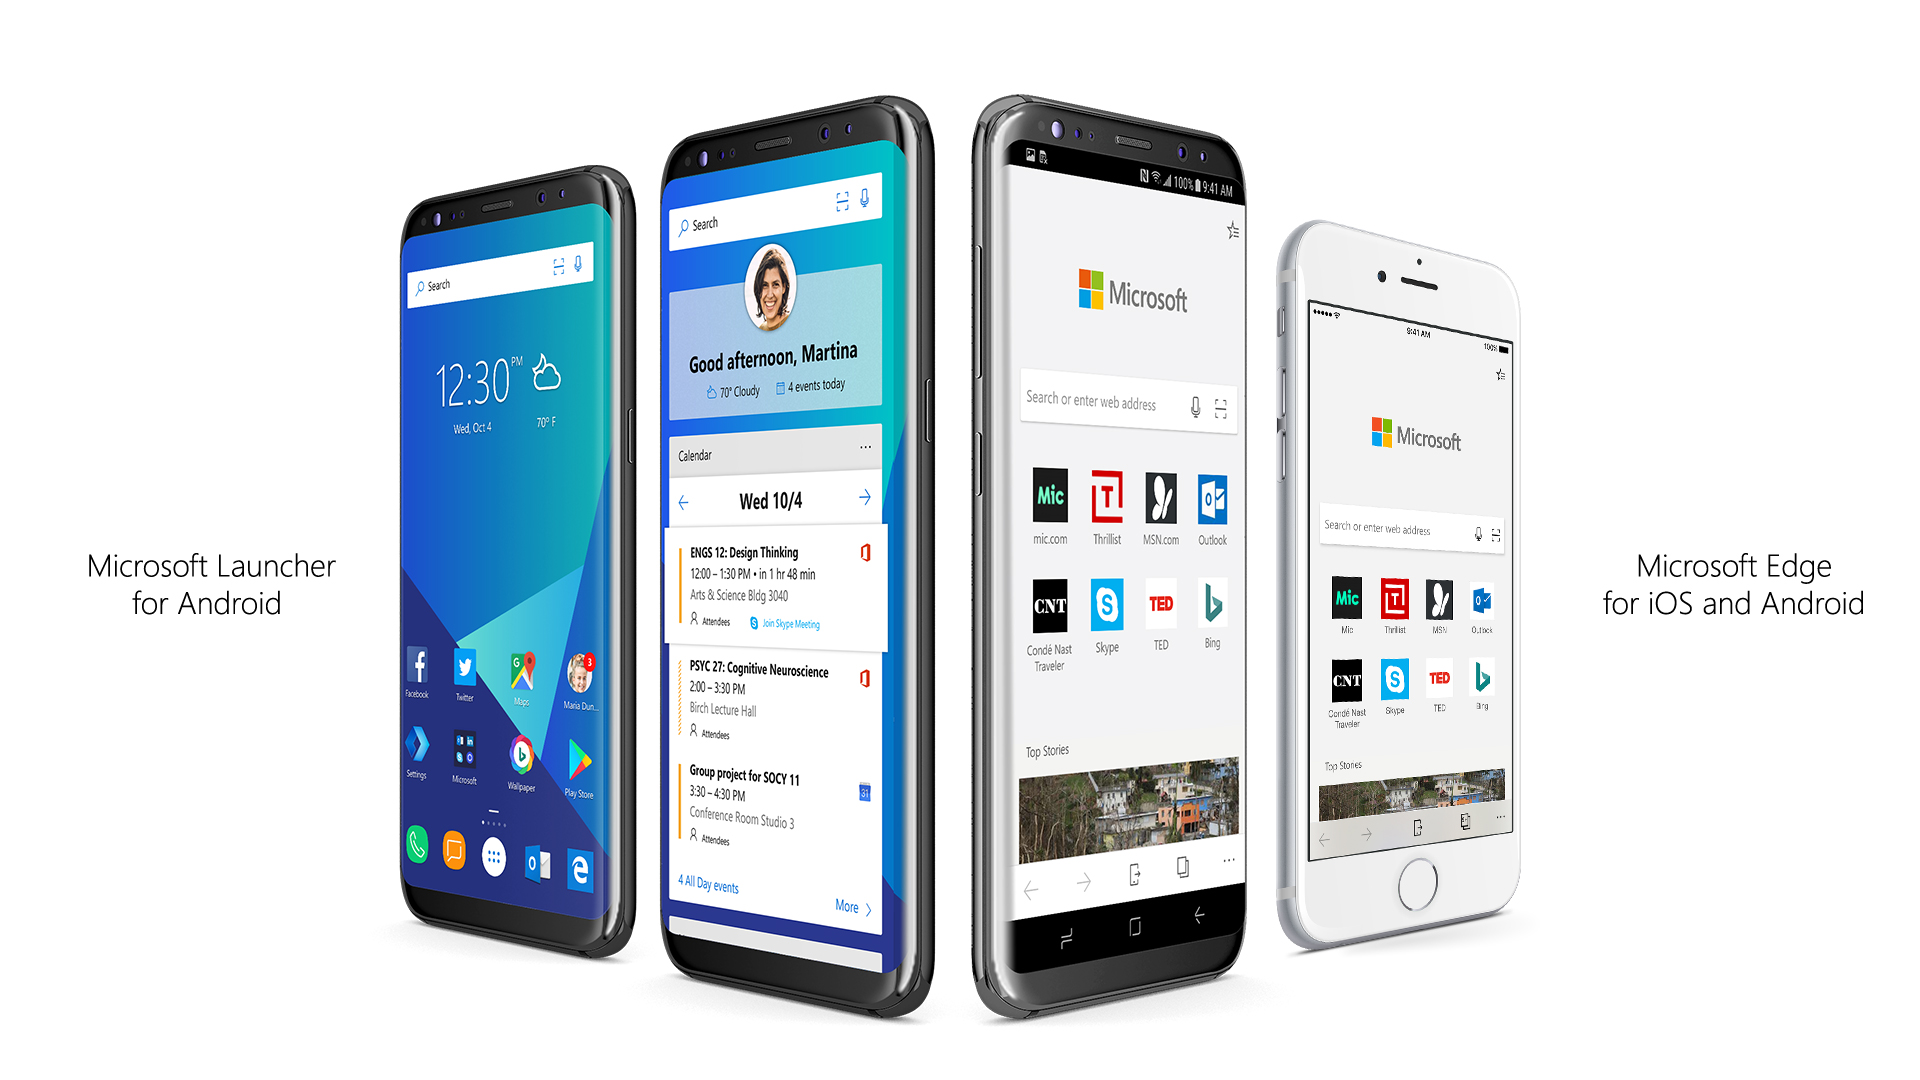 New Microsoft Launcher 5.0.2.47383 version for Android - November 20 caaf609f6273fcc3e9545708498dcded.jpg